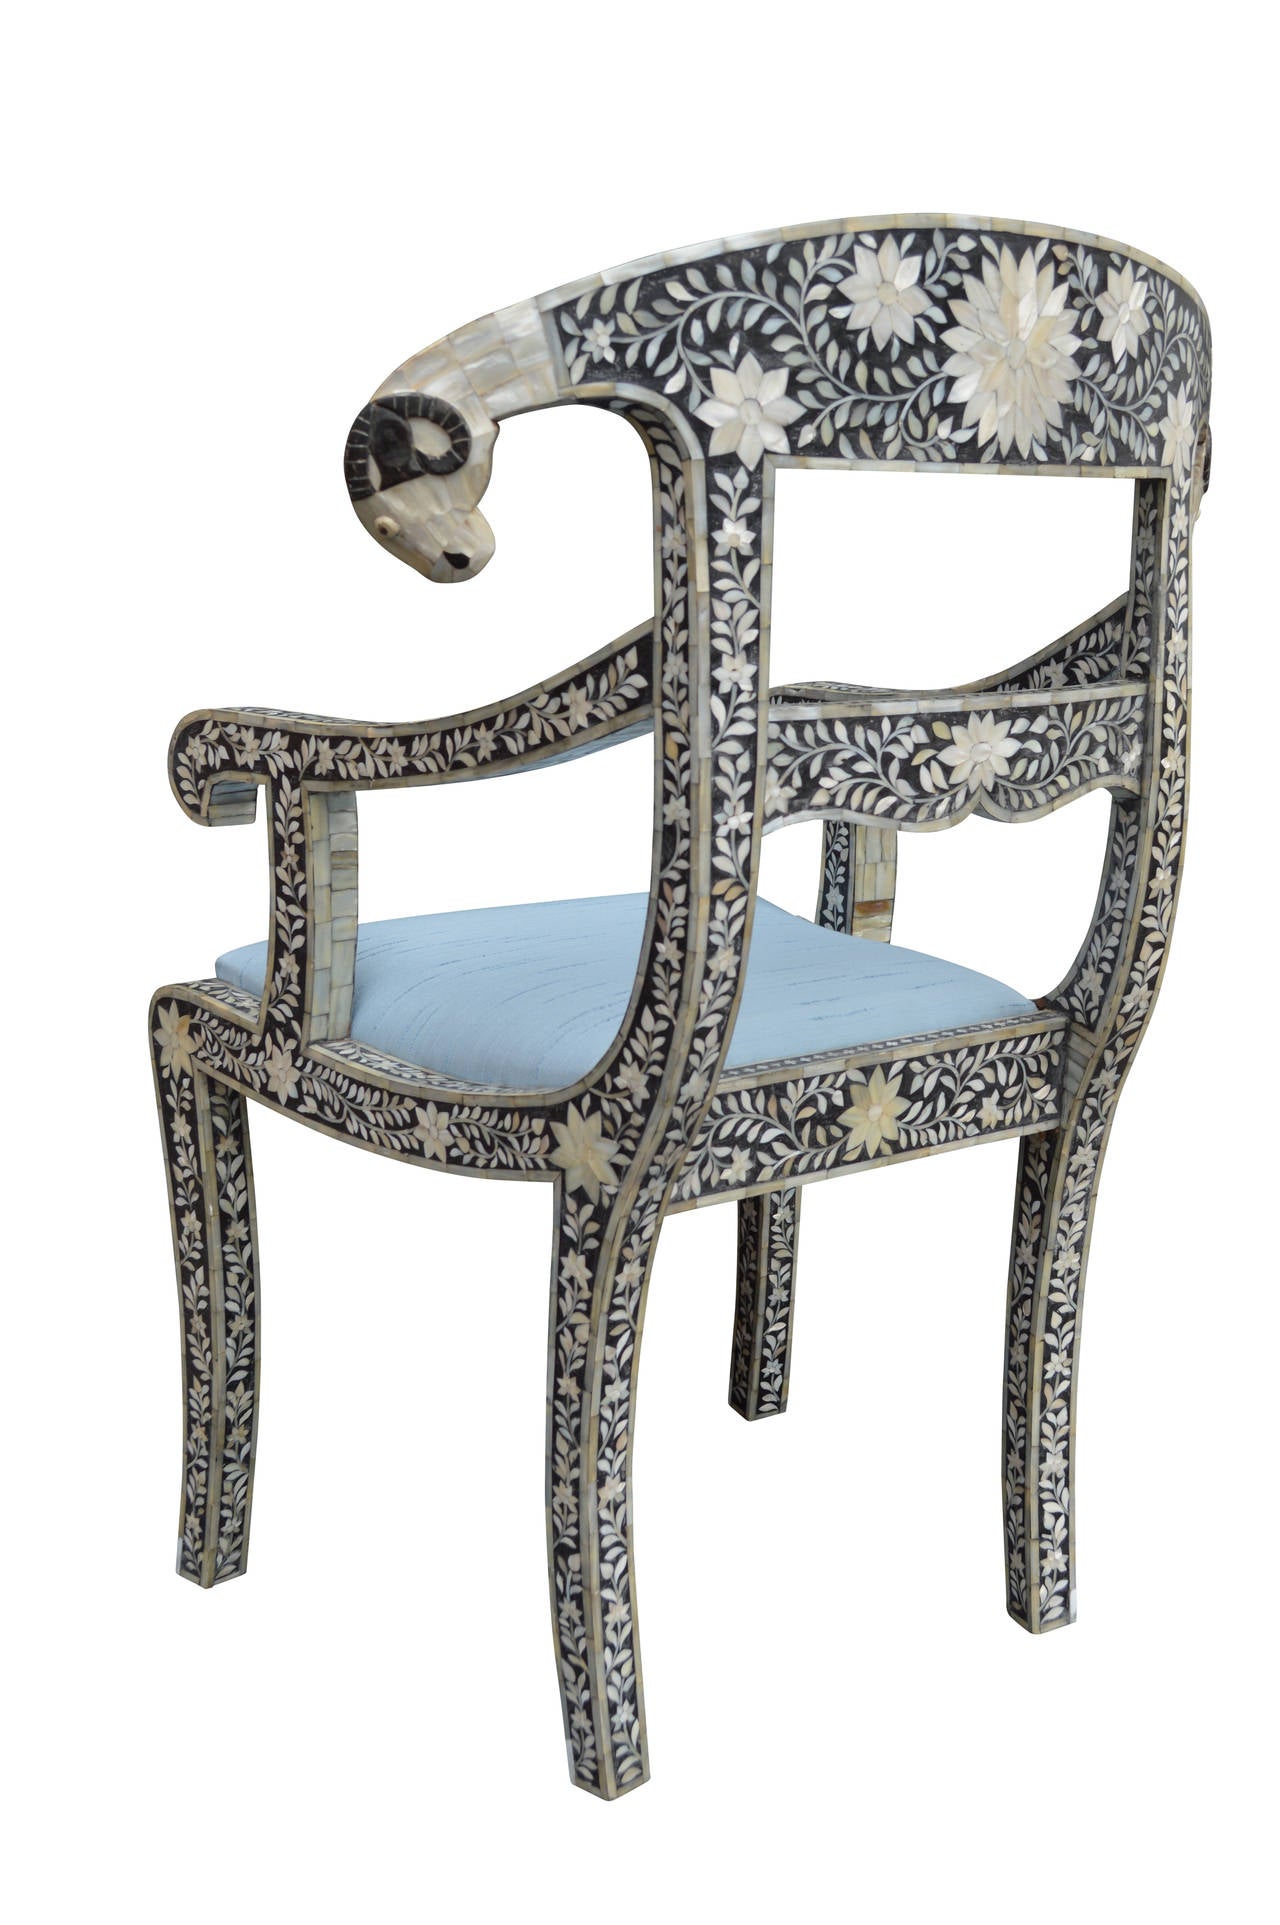 Inlay Mother-of-pearl Inlaid Armchair